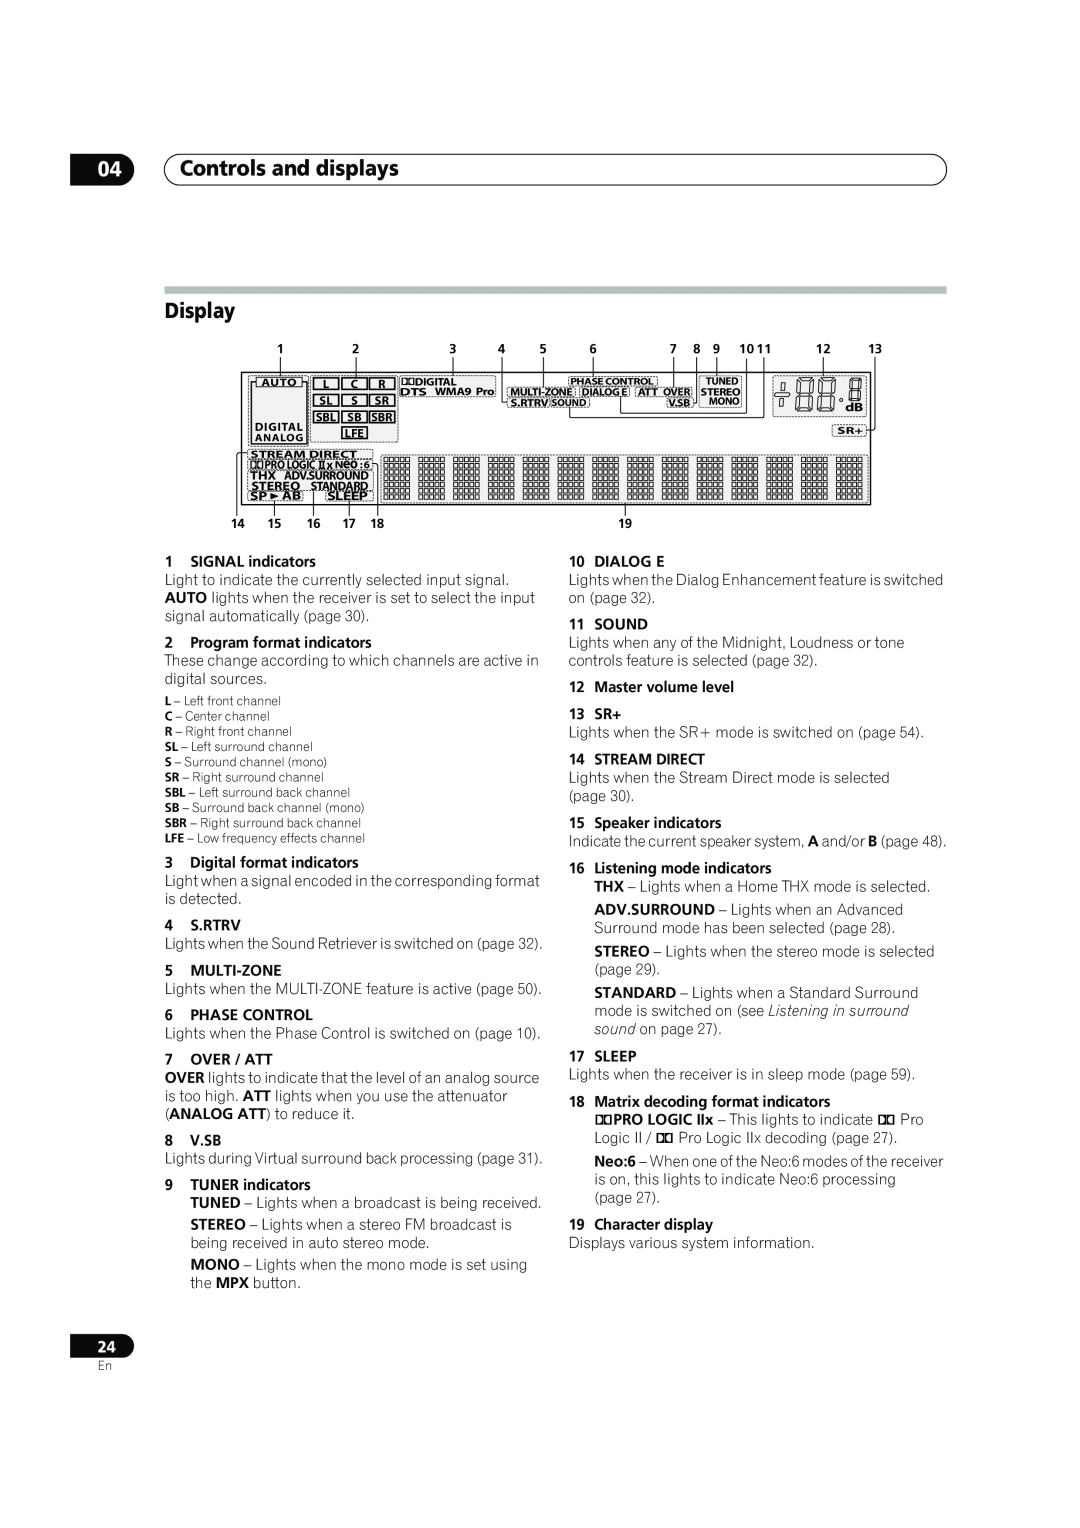 Pioneer VSX-90TXV operating instructions 04Controls and displays, Display 